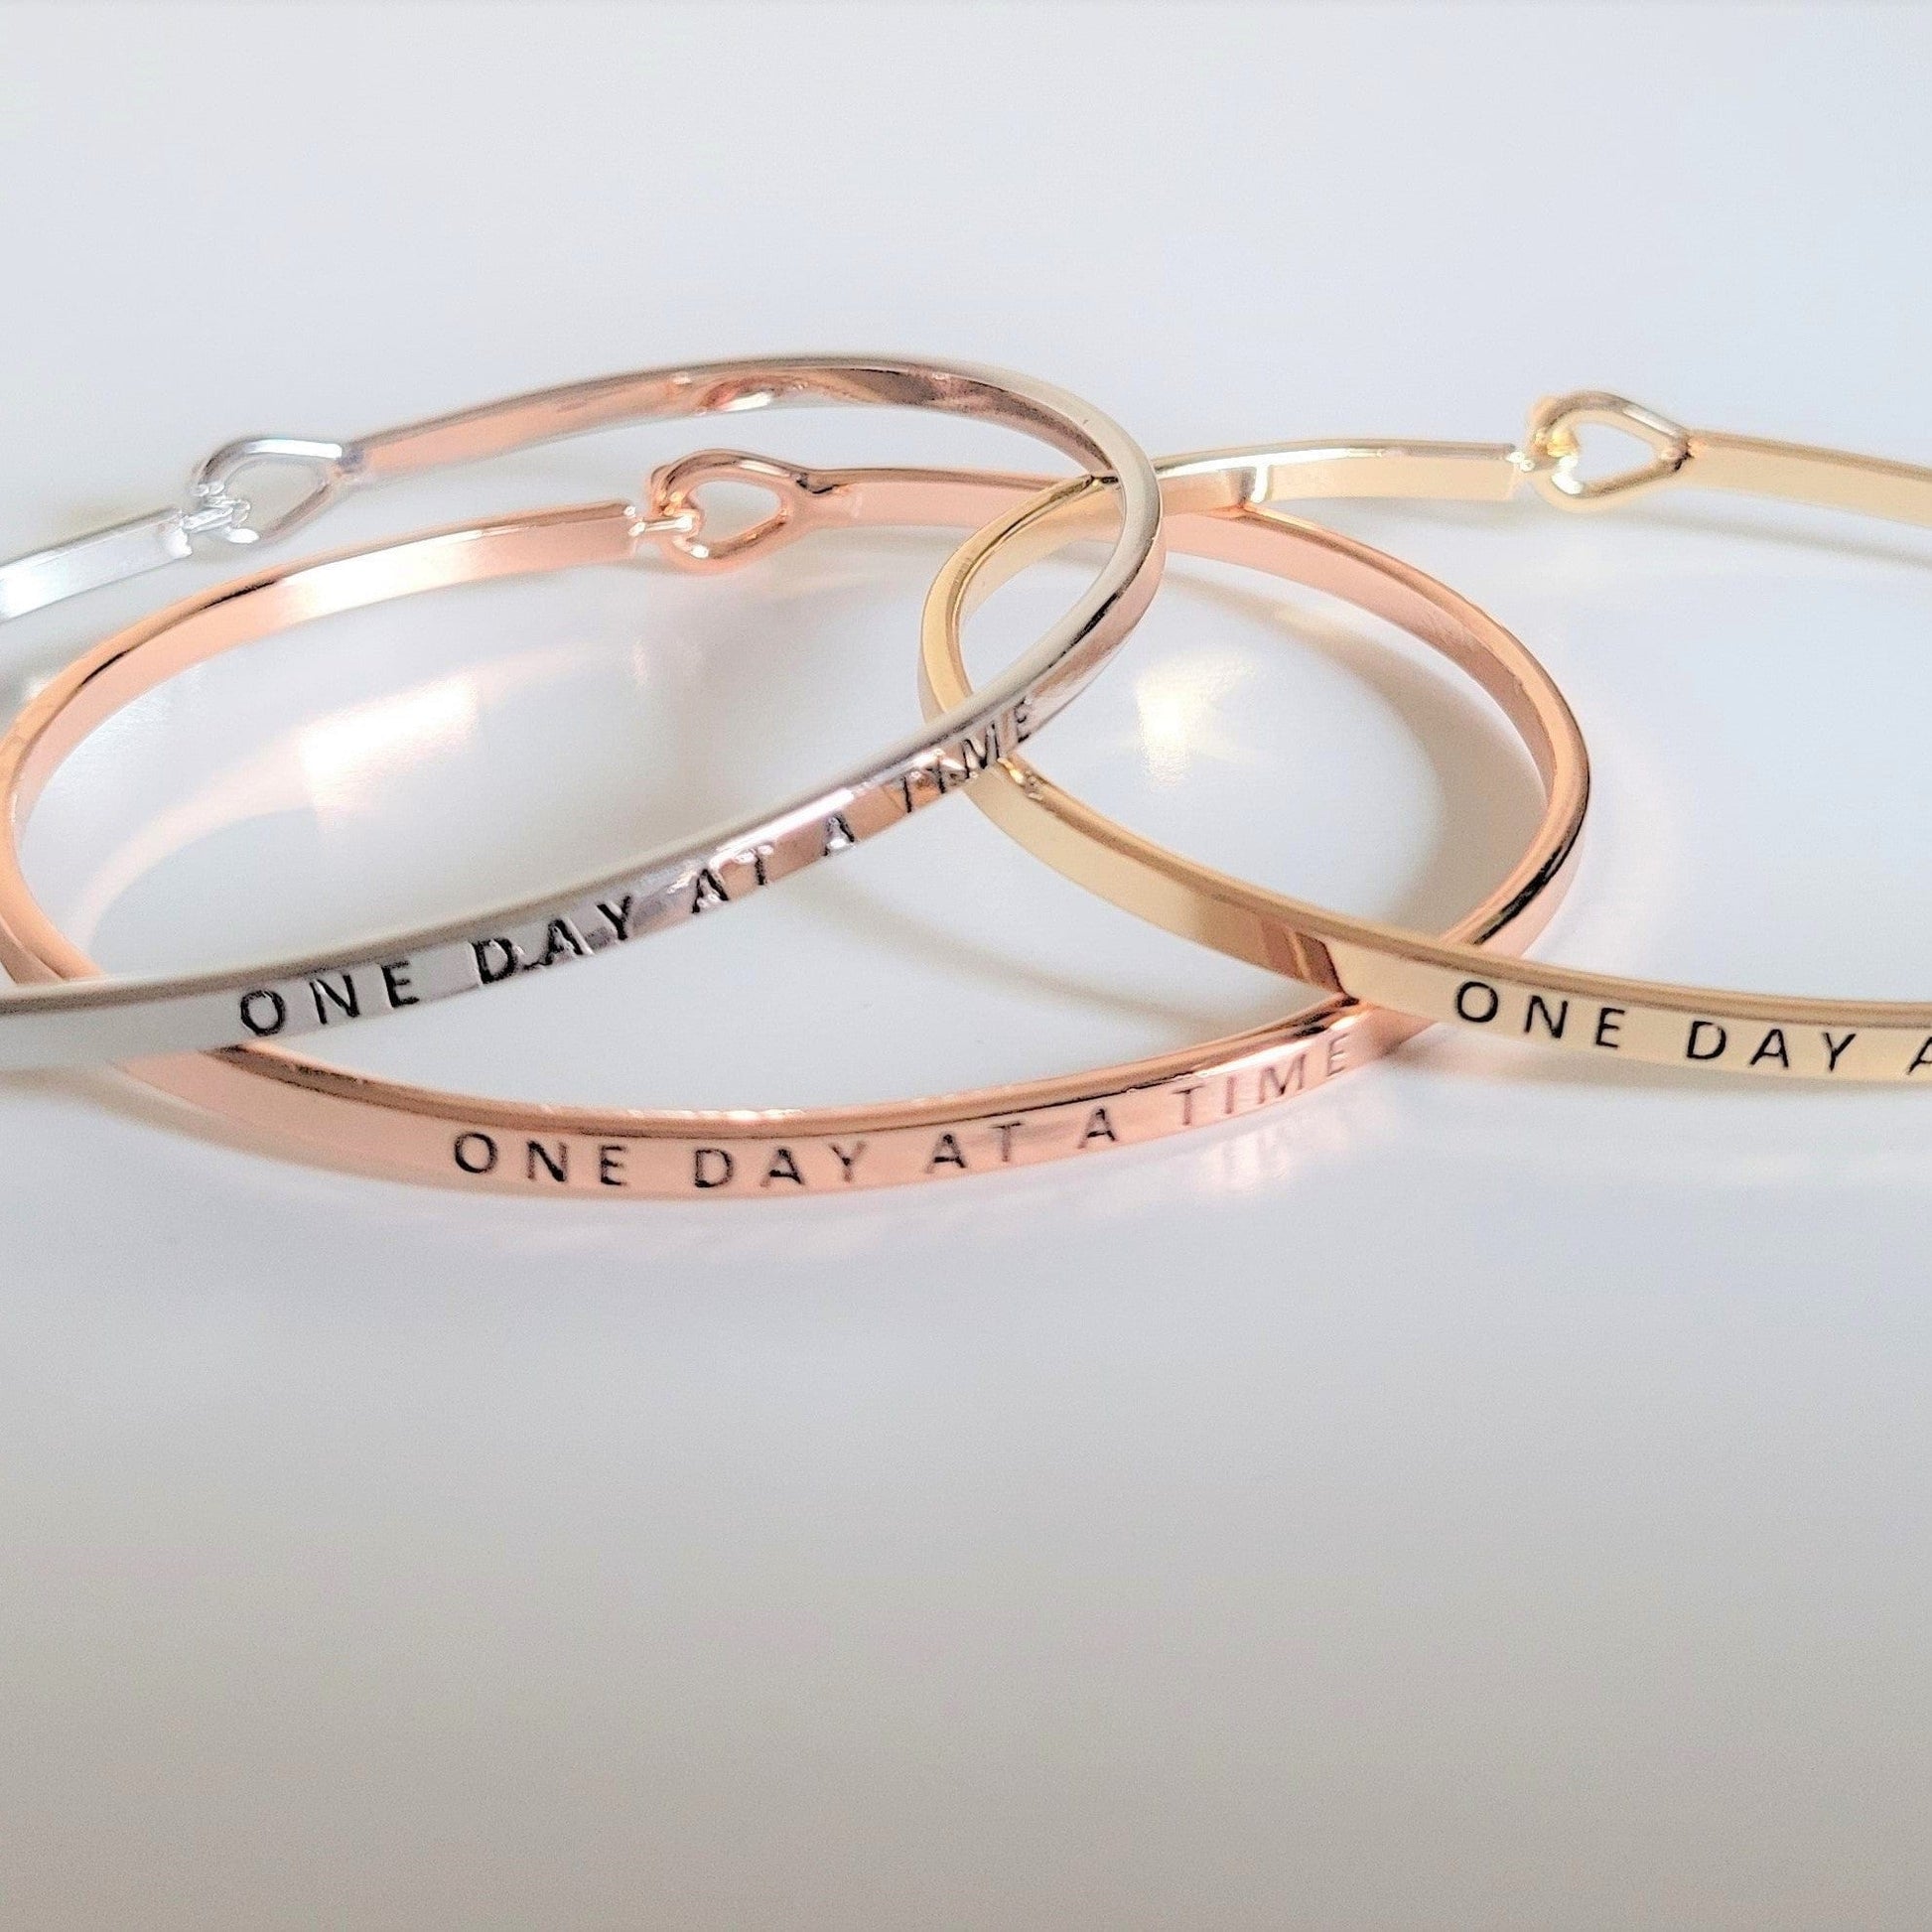 "One Day At A Time" Bracelet By Recovery Matters